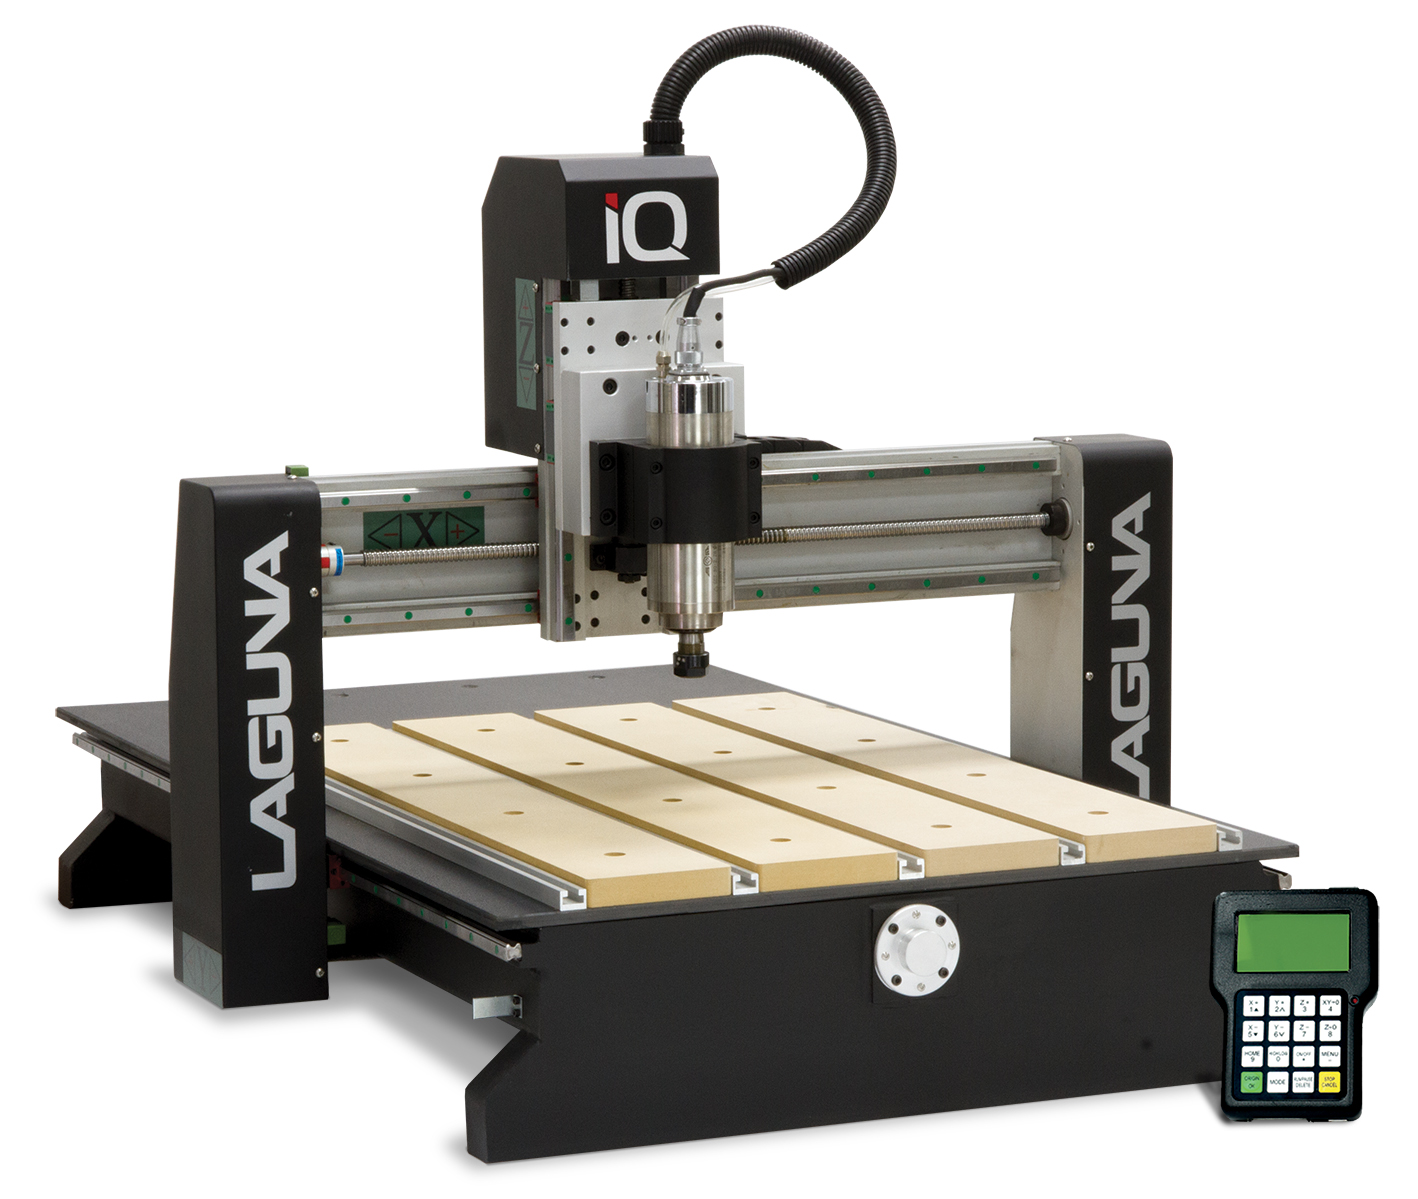 Introducing A Cnc Router To Your Shop Graphics Pro